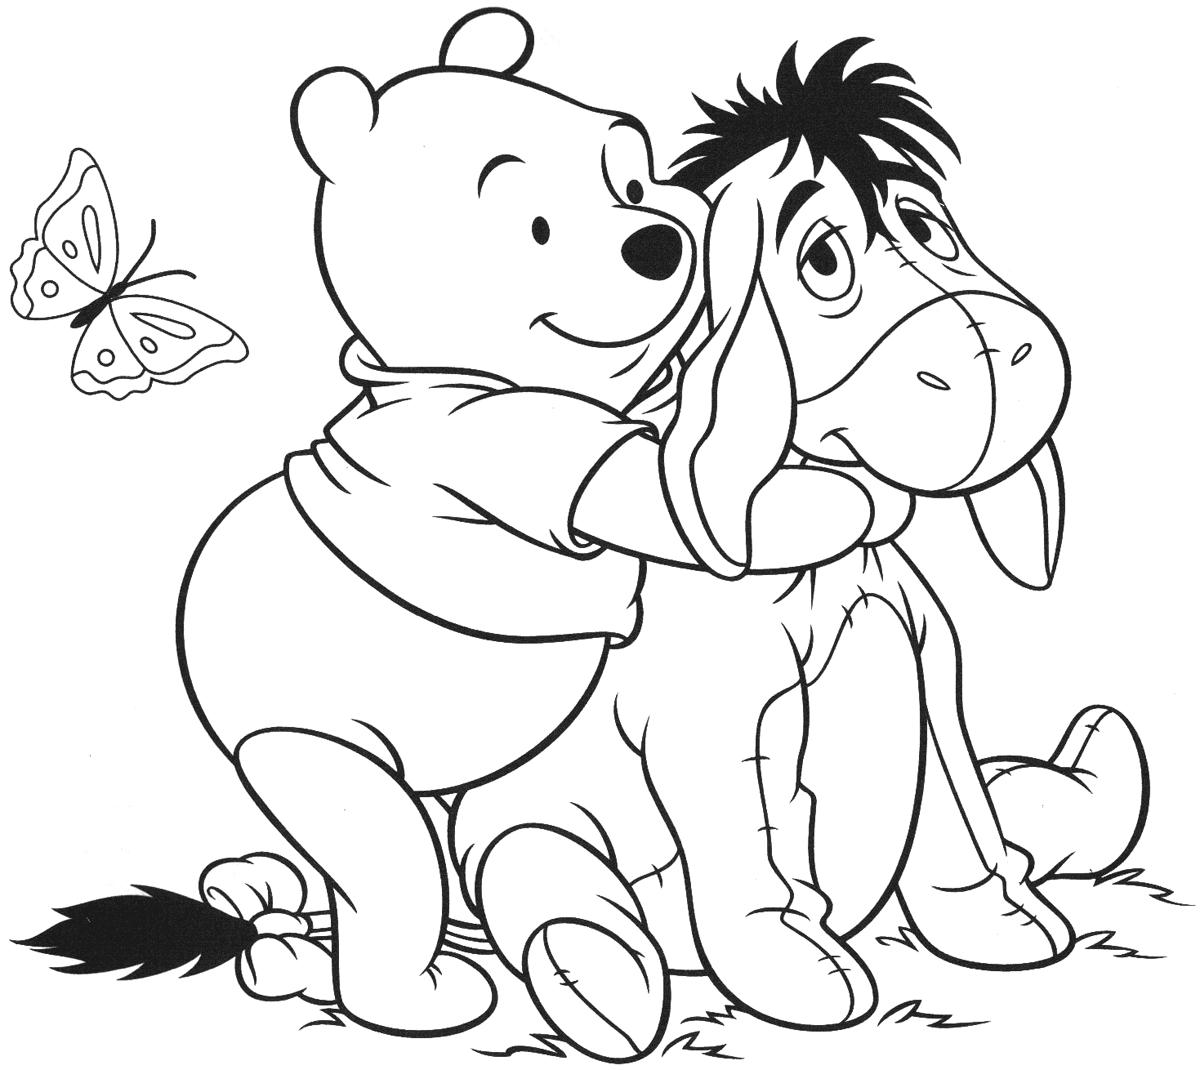 Free Printable Winnie The Pooh Coloring Pages For Kids - SheetalColor.com